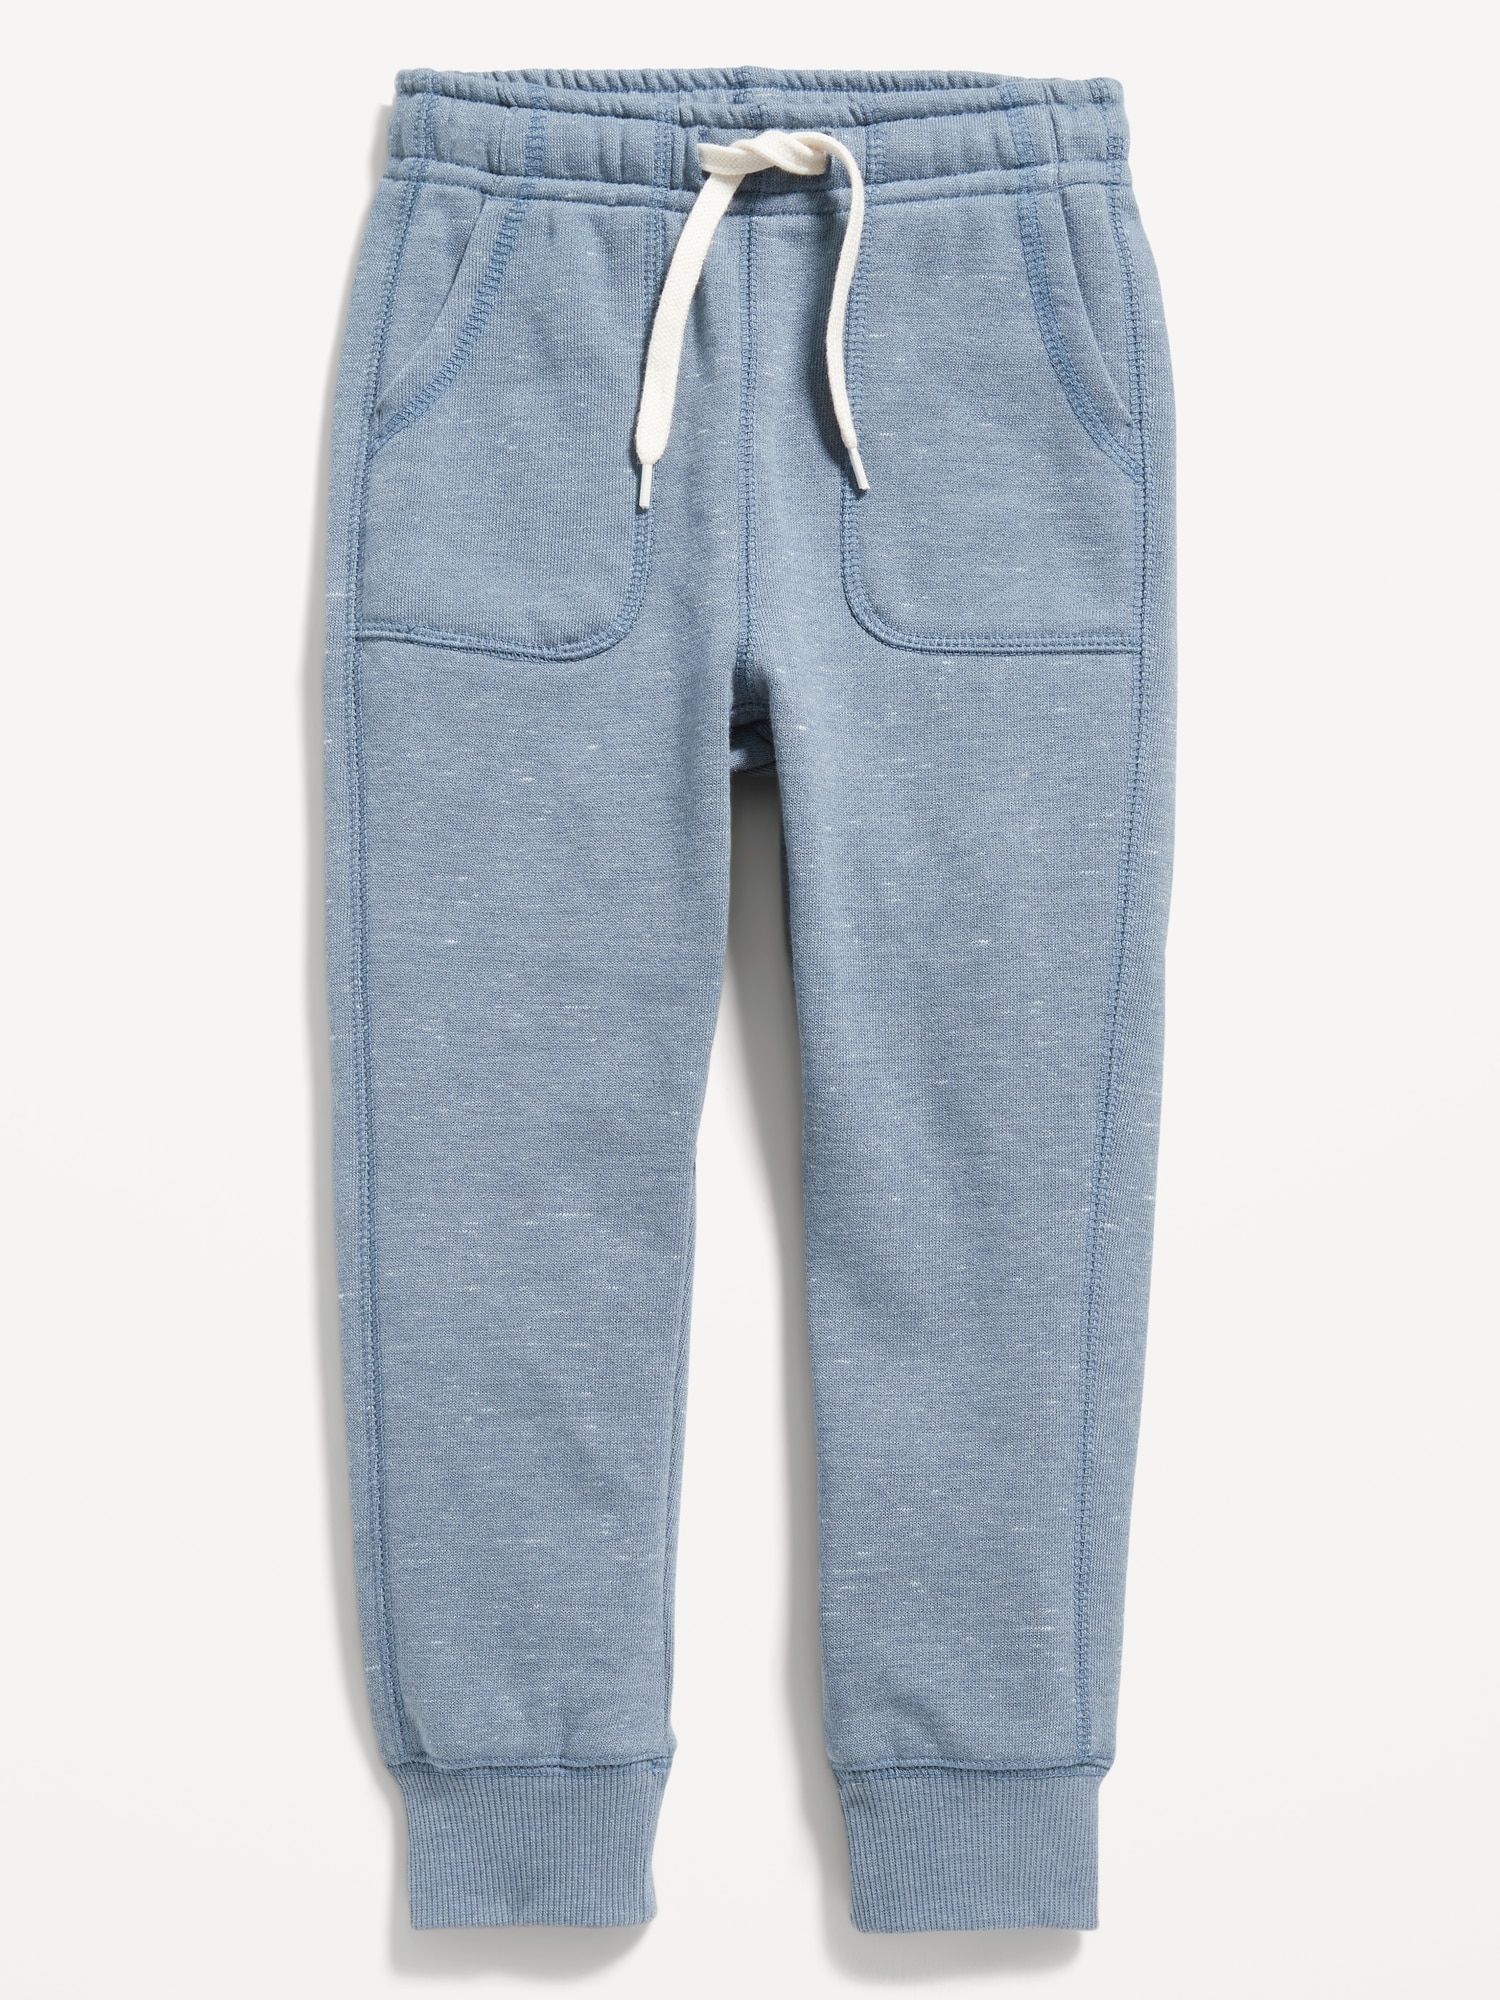 Unisex Functional Drawstring Jogger Sweatpants for Toddler | Old Navy